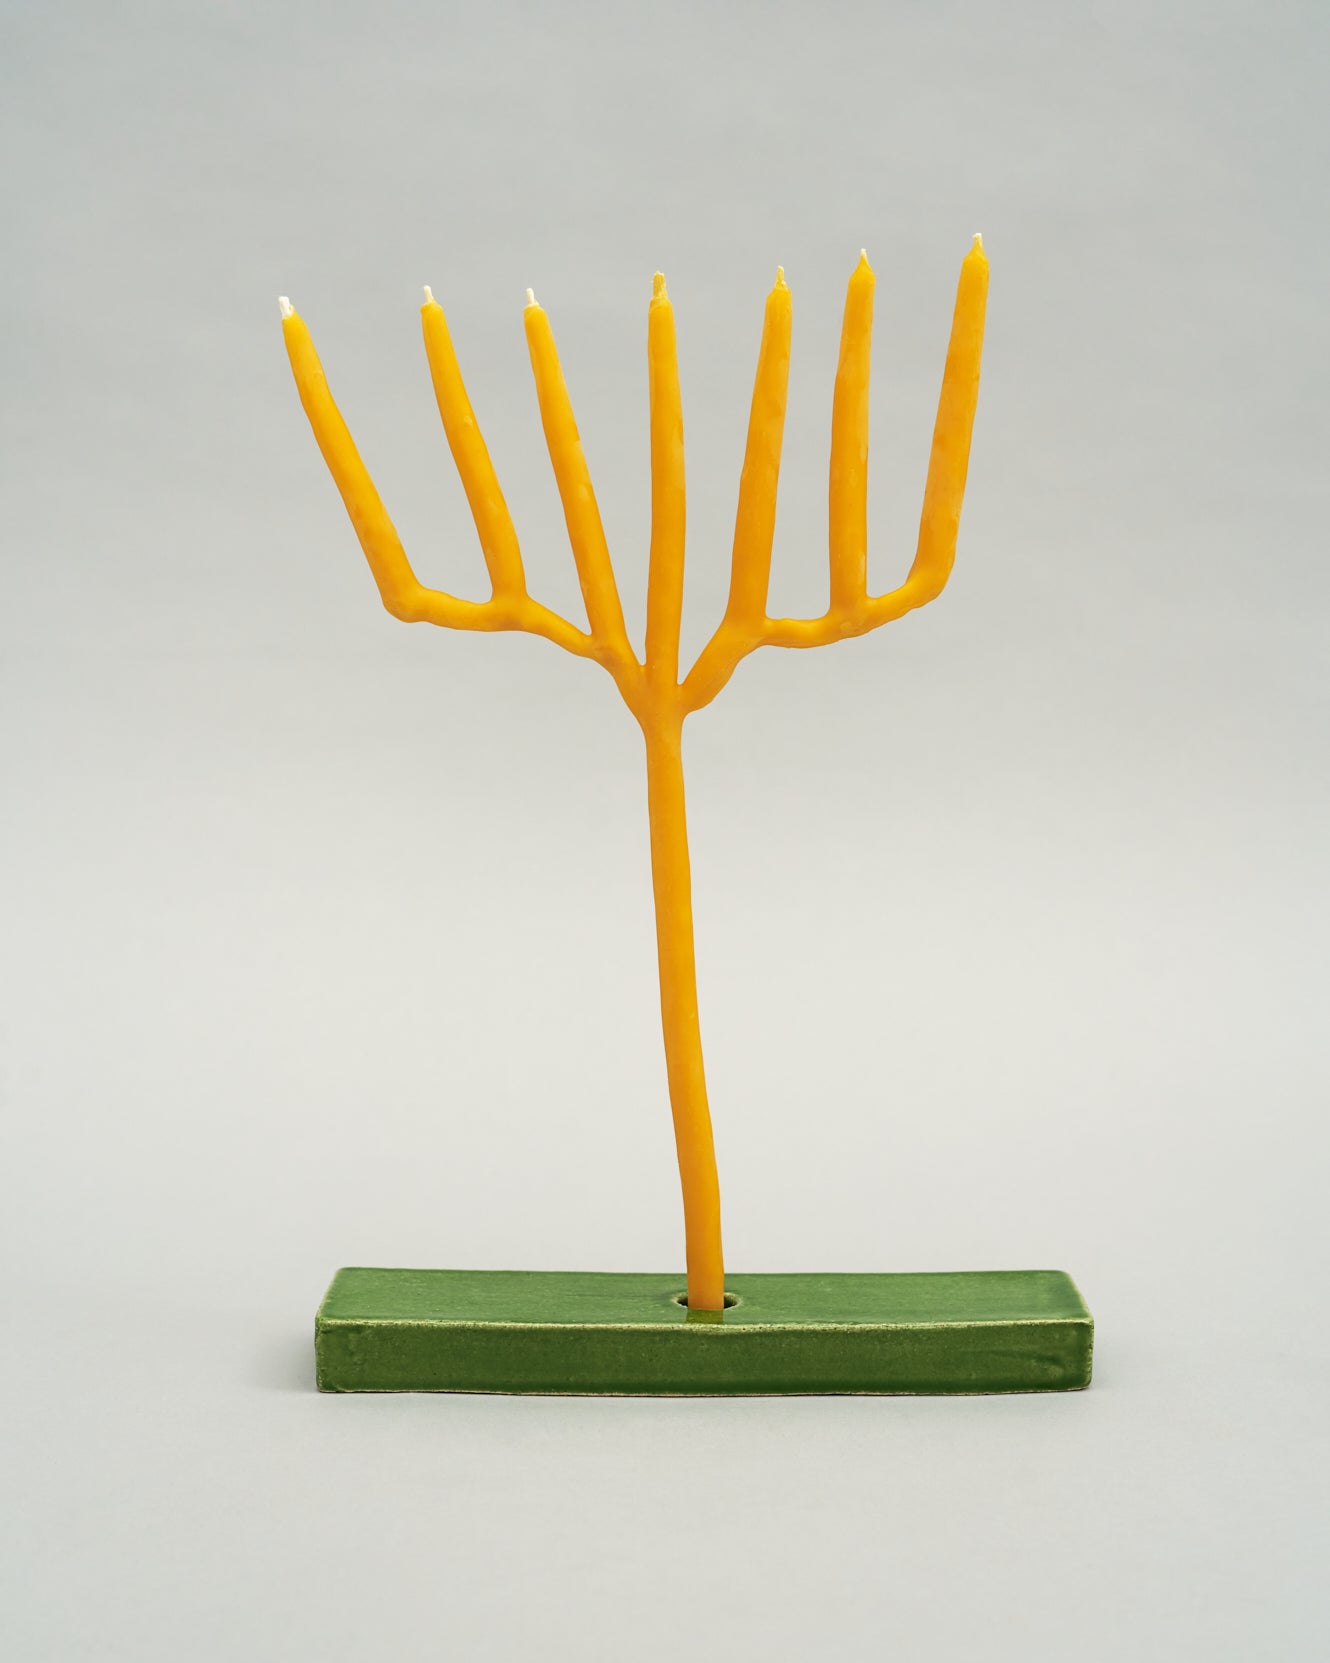 Candle Holder in Green